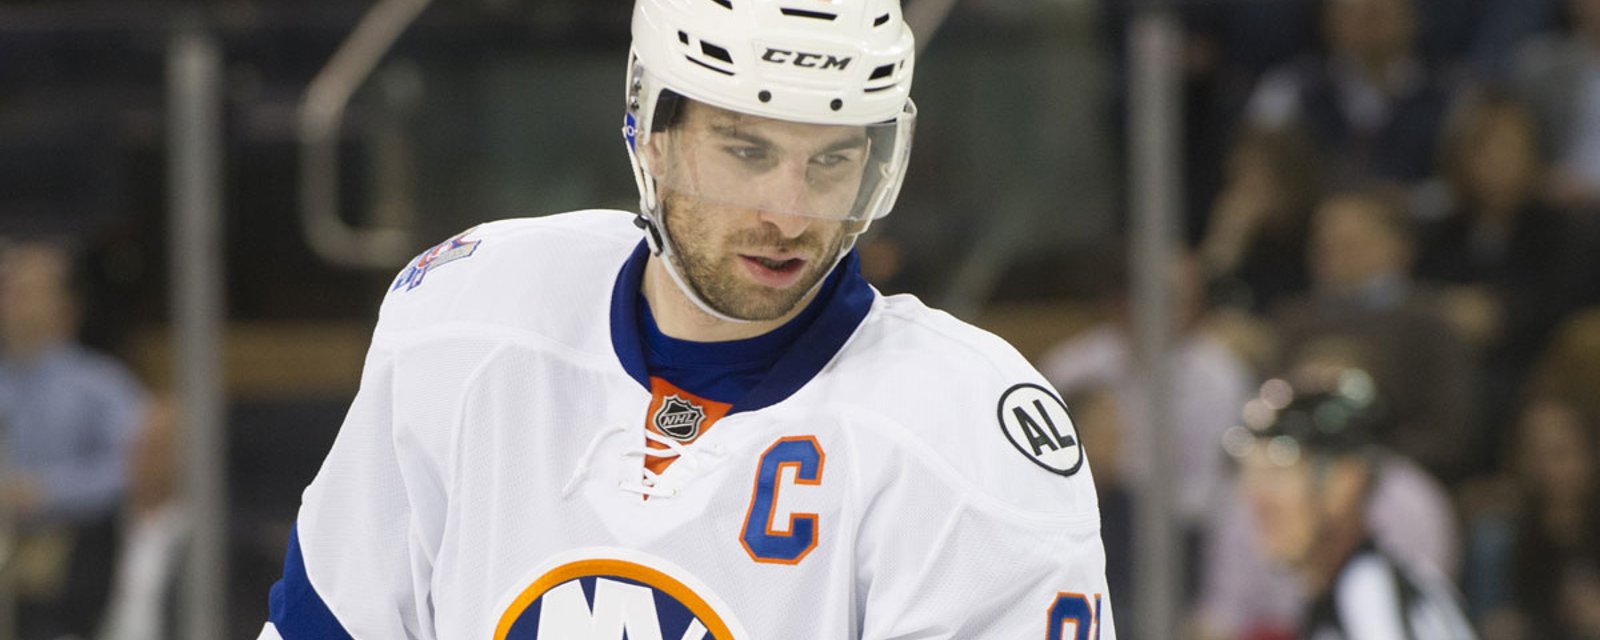 Report: NHL insider provides update on strained Tavares negotiations